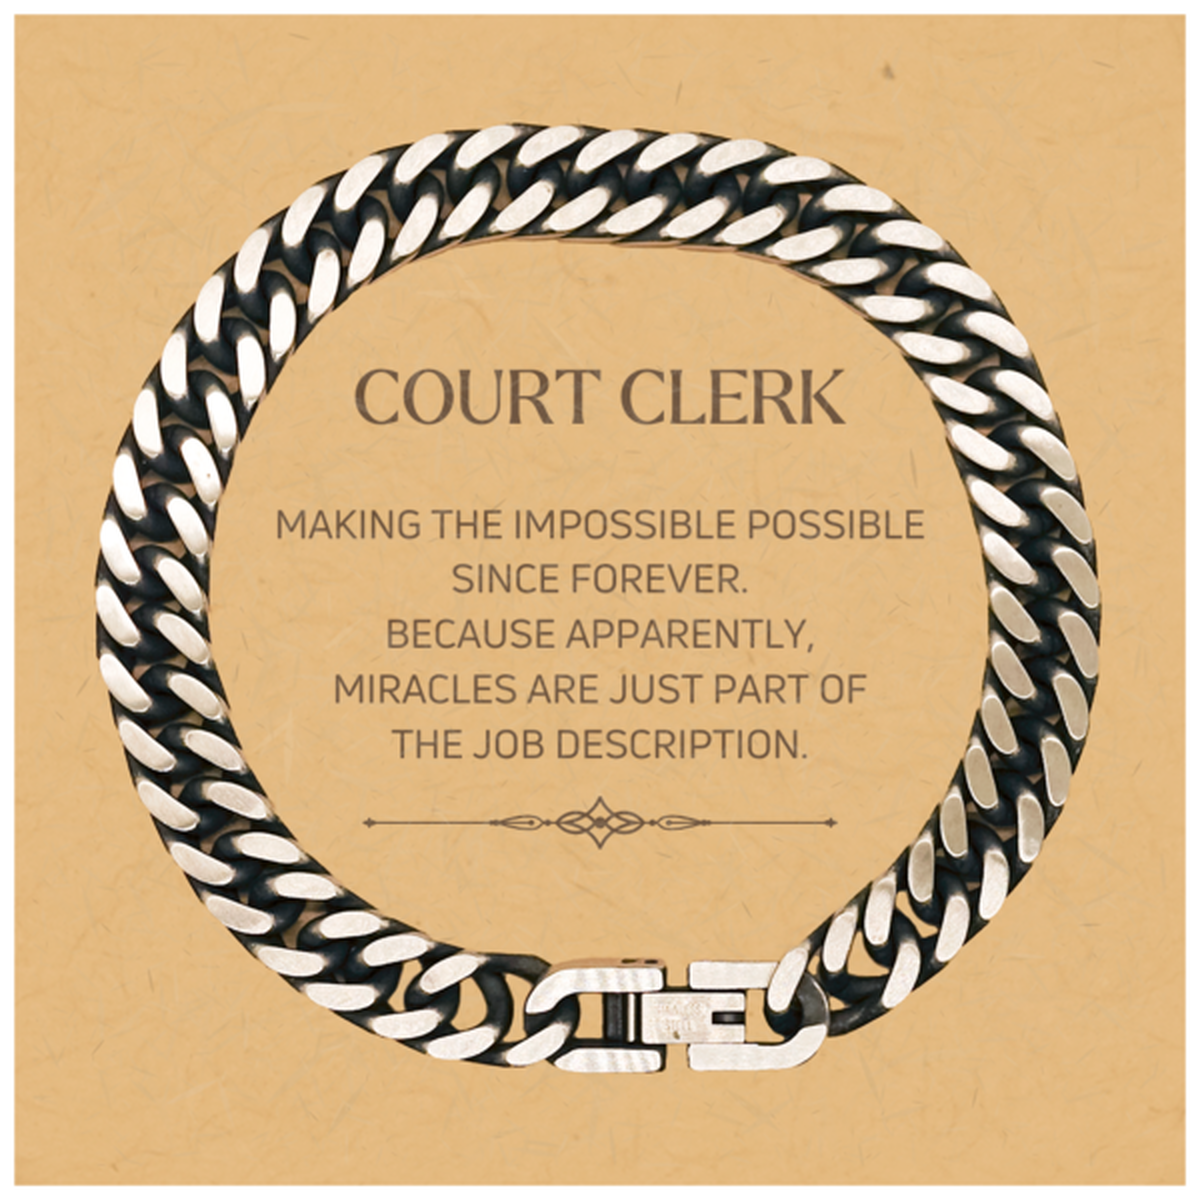 Funny Court Clerk Gifts, Miracles are just part of the job description, Inspirational Birthday Christmas Cuban Link Chain Bracelet For Court Clerk, Men, Women, Coworkers, Friends, Boss